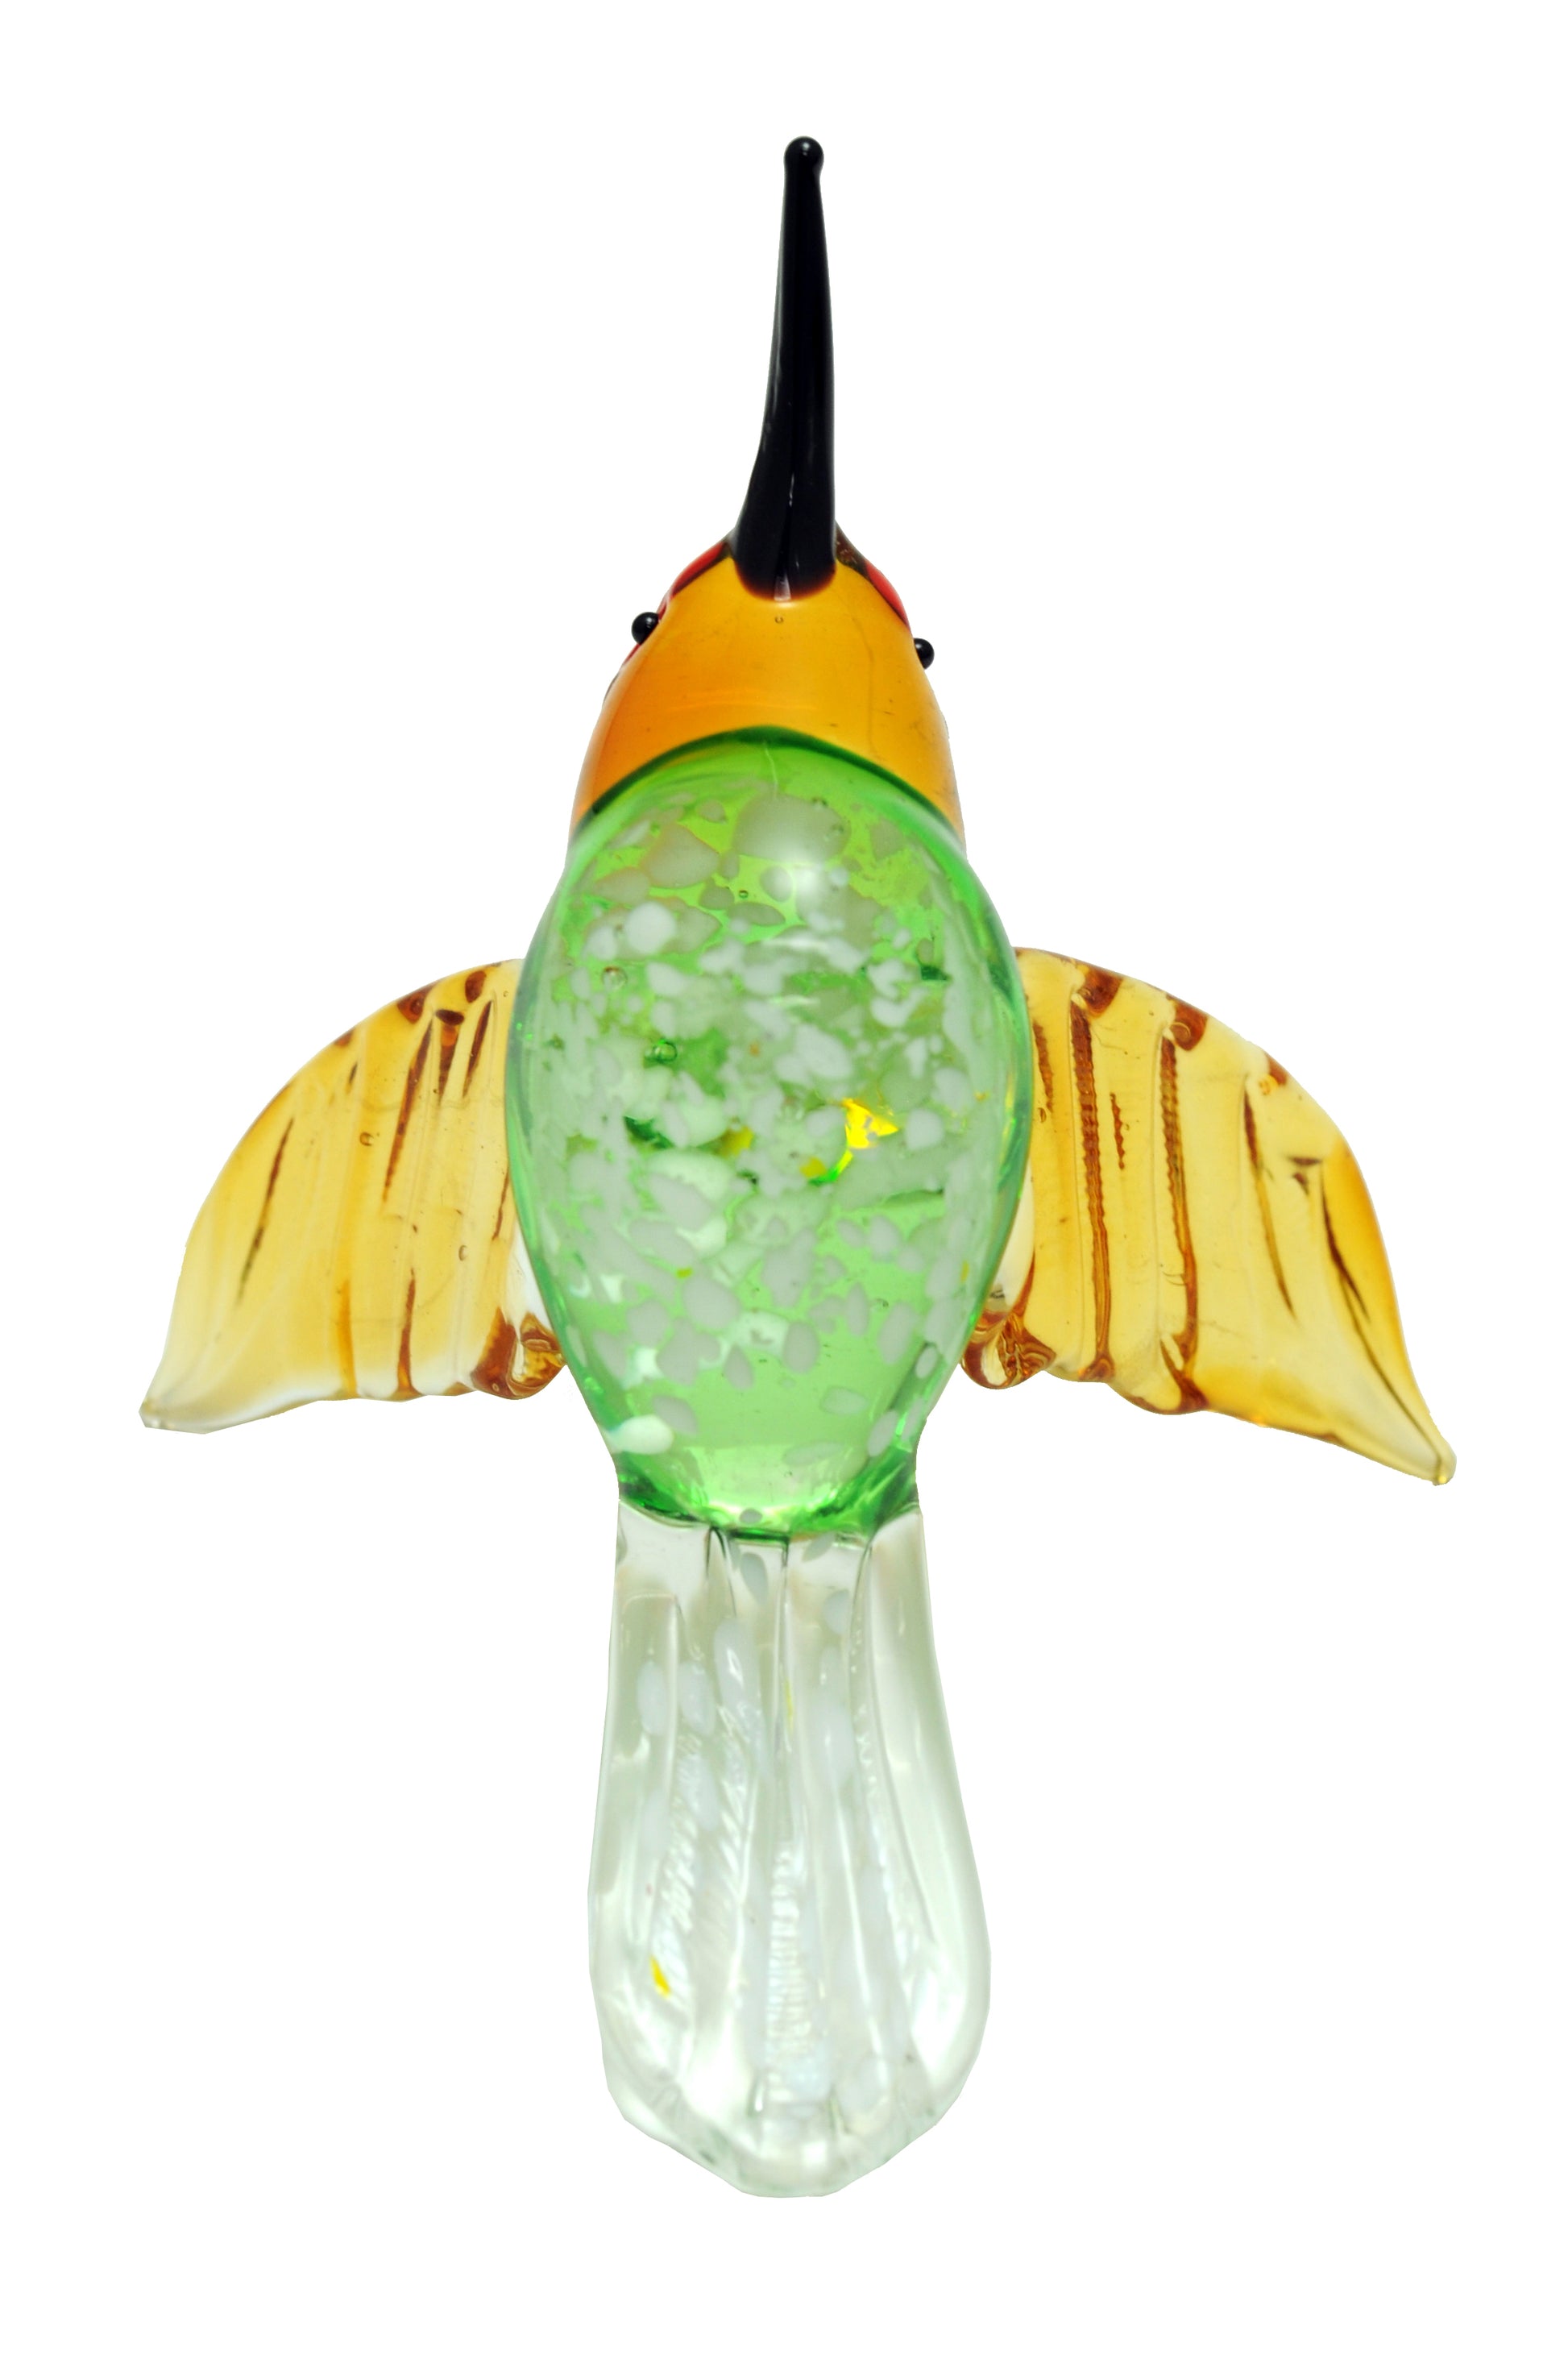 Crystal Castle Glass hummingbird in Yellow, Green and Orange, Bottom View.